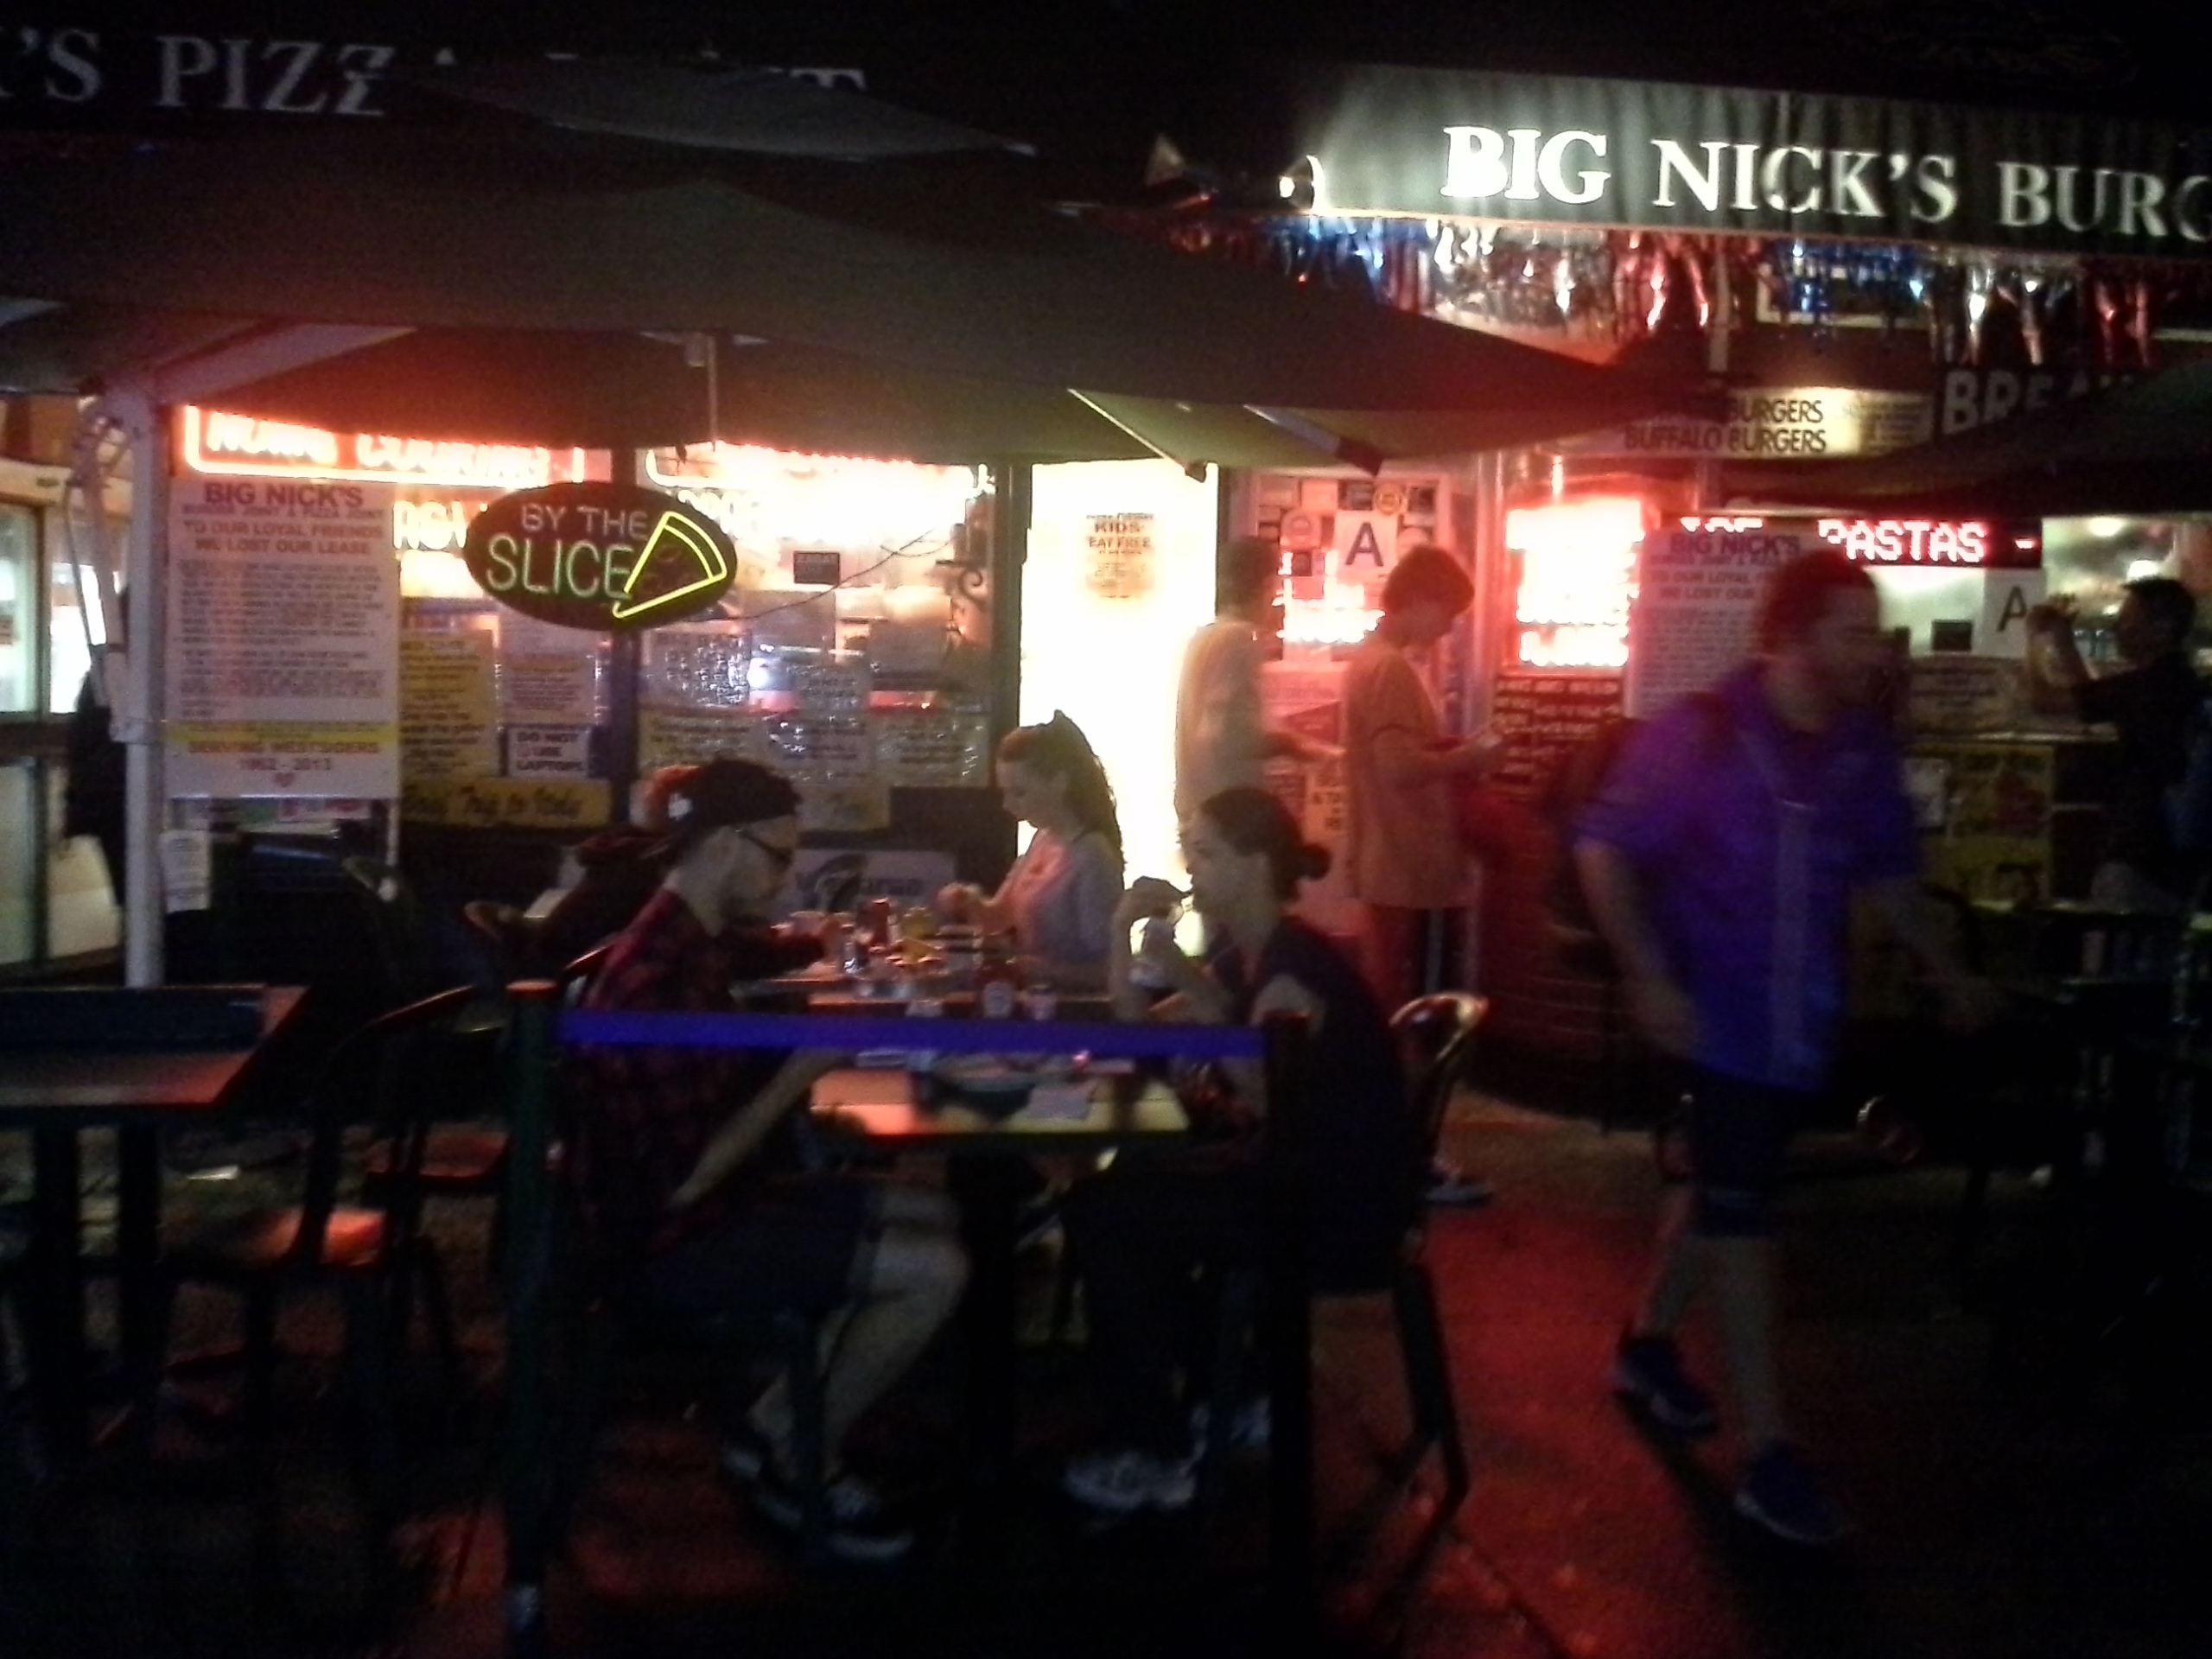 The final night of operation for Big Nick's Burger Joint & Pizza Joint.